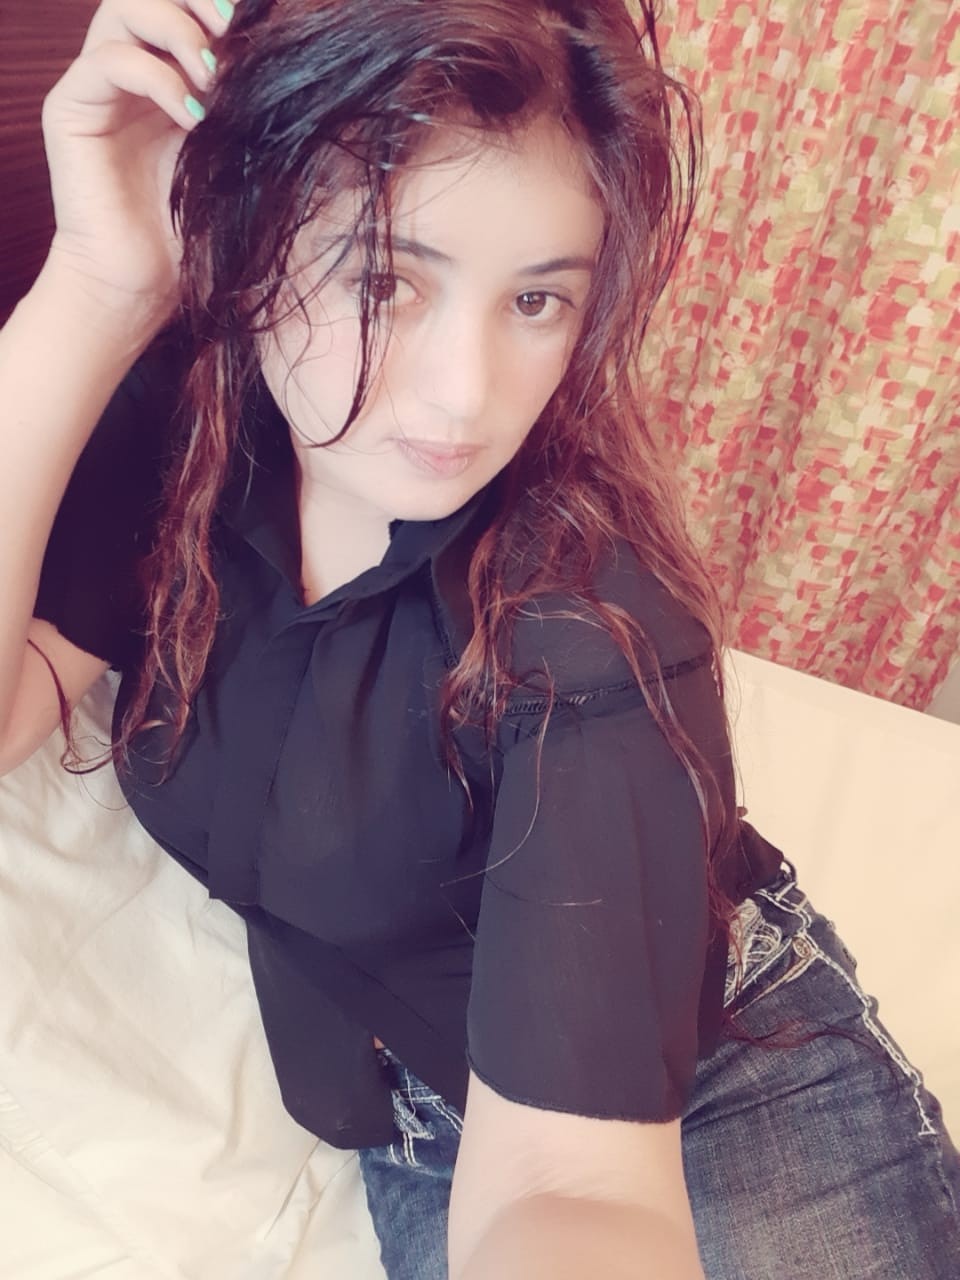 Independent Call Girls In Dubai  +971 503114274